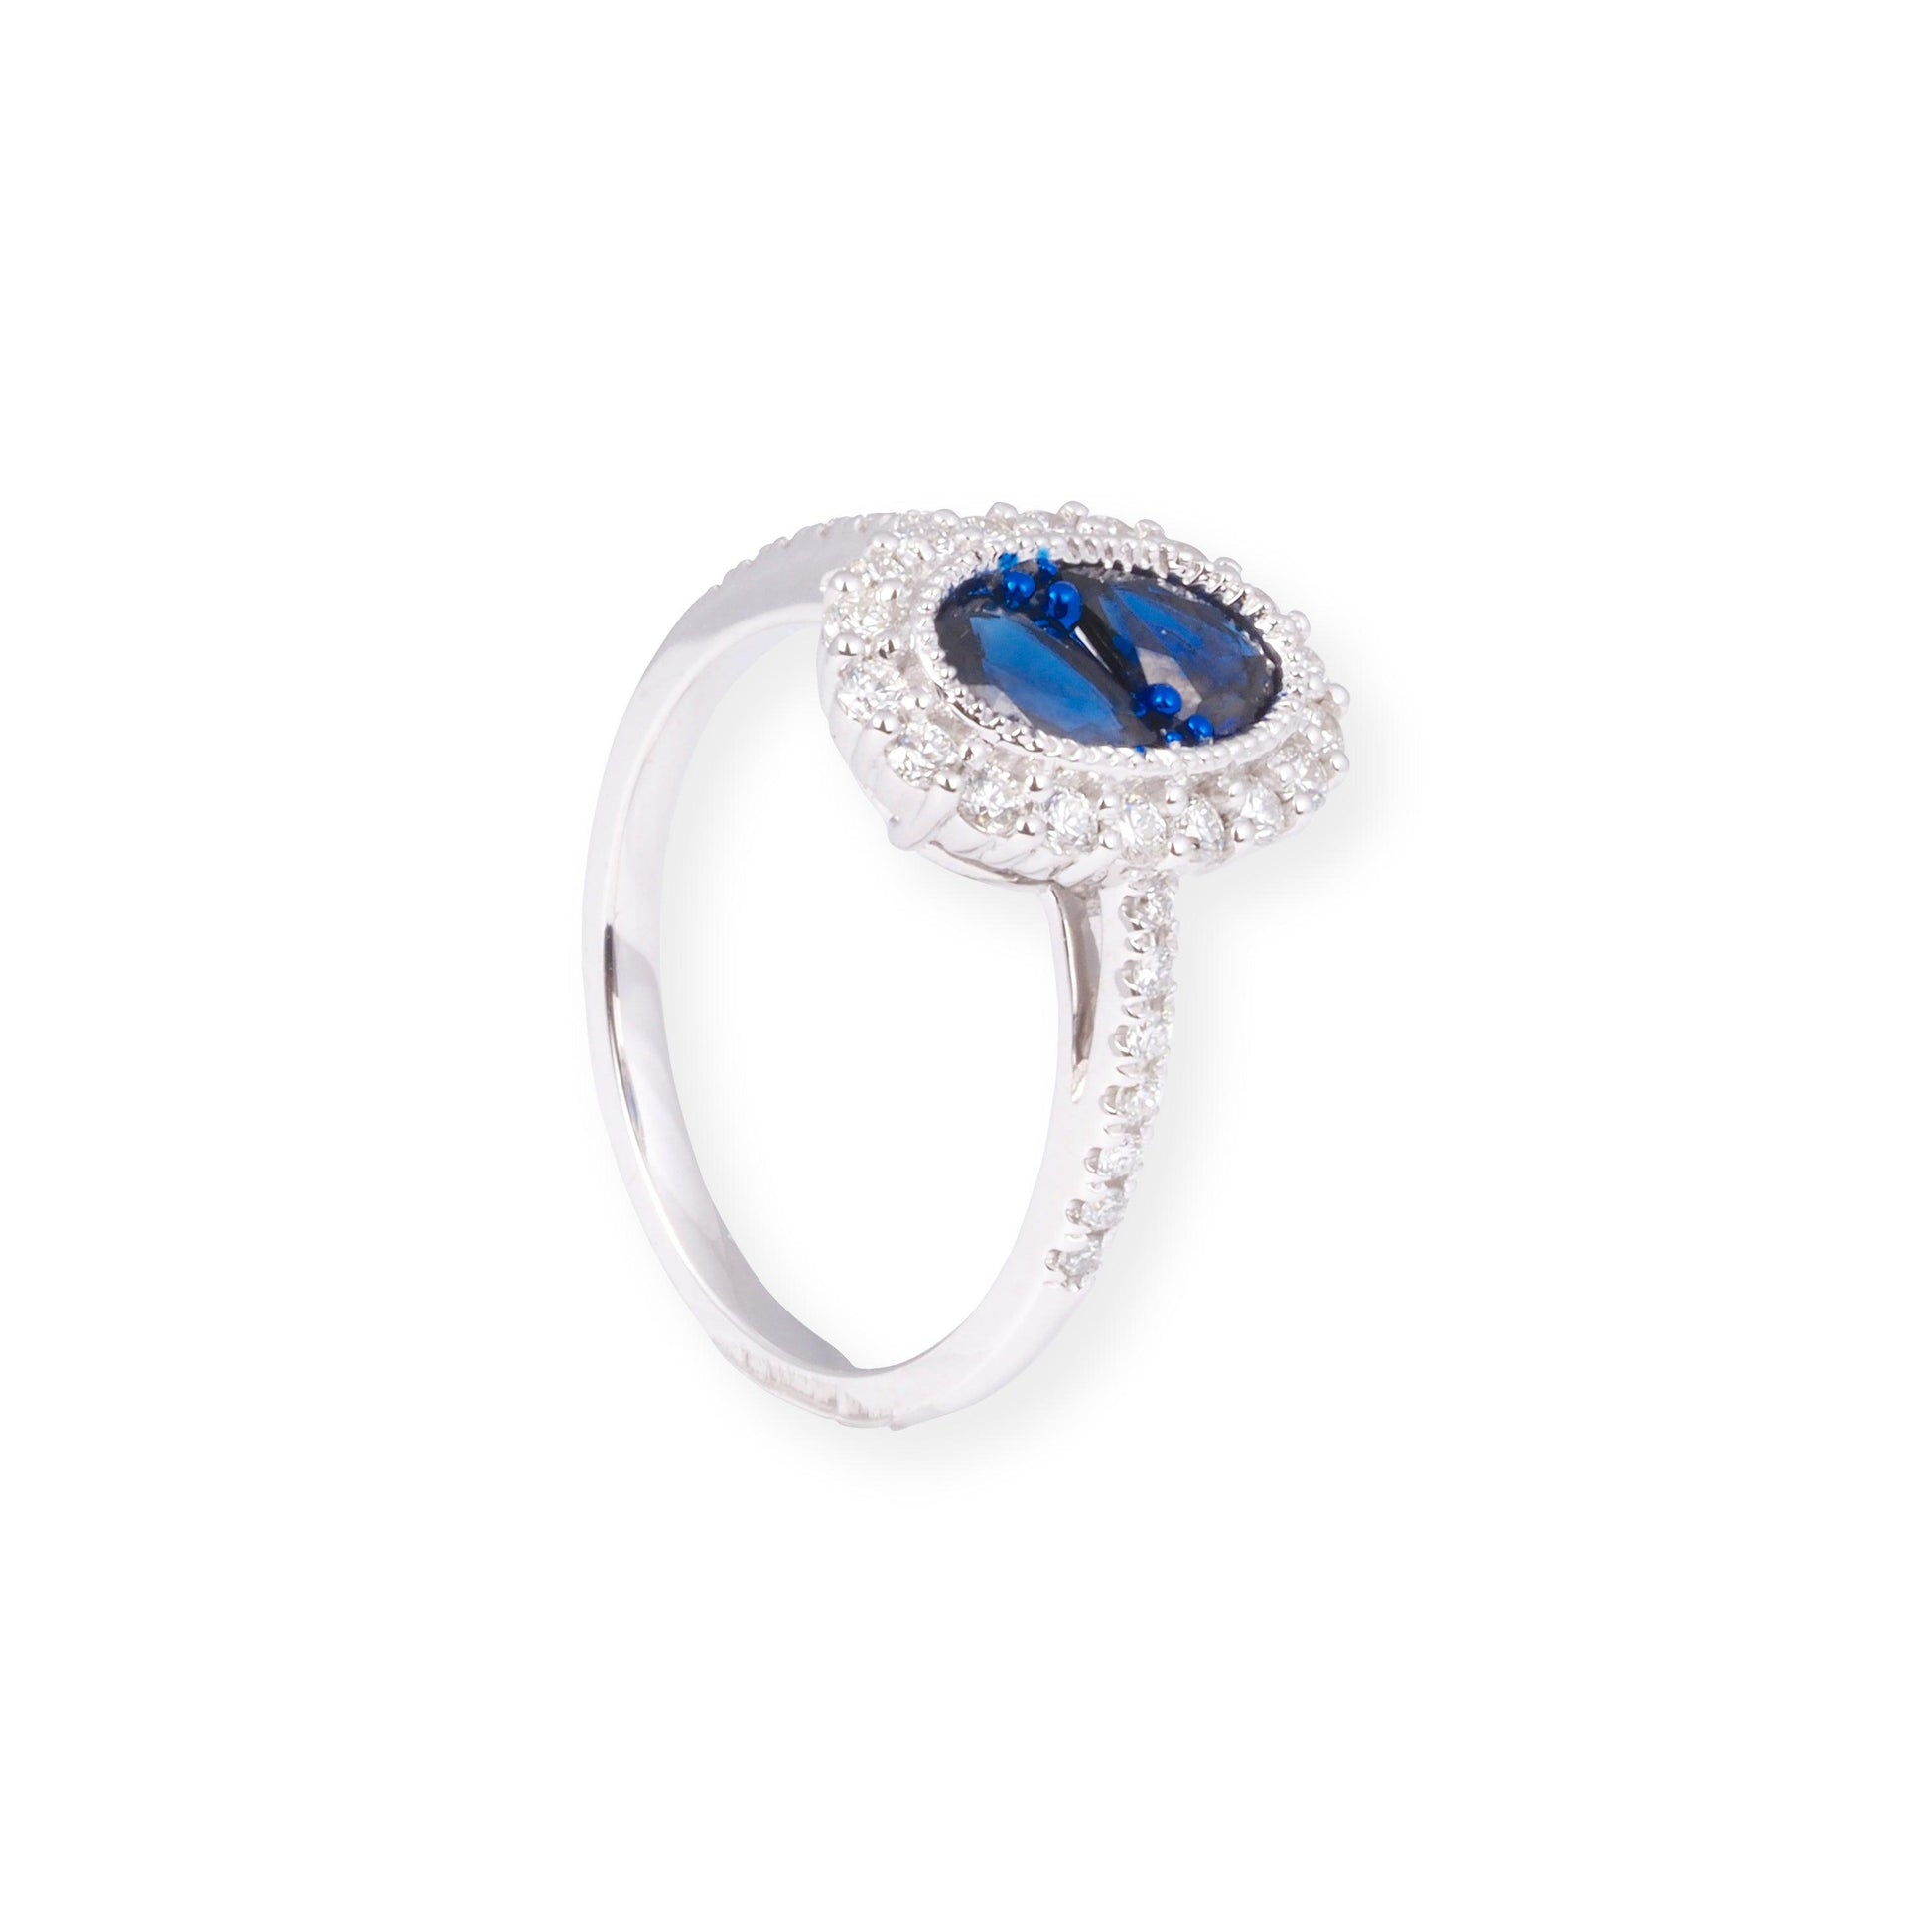 18ct White Gold Oval Shaped Diamond & Blue Sapphire Ring LR-7044 - Minar Jewellers